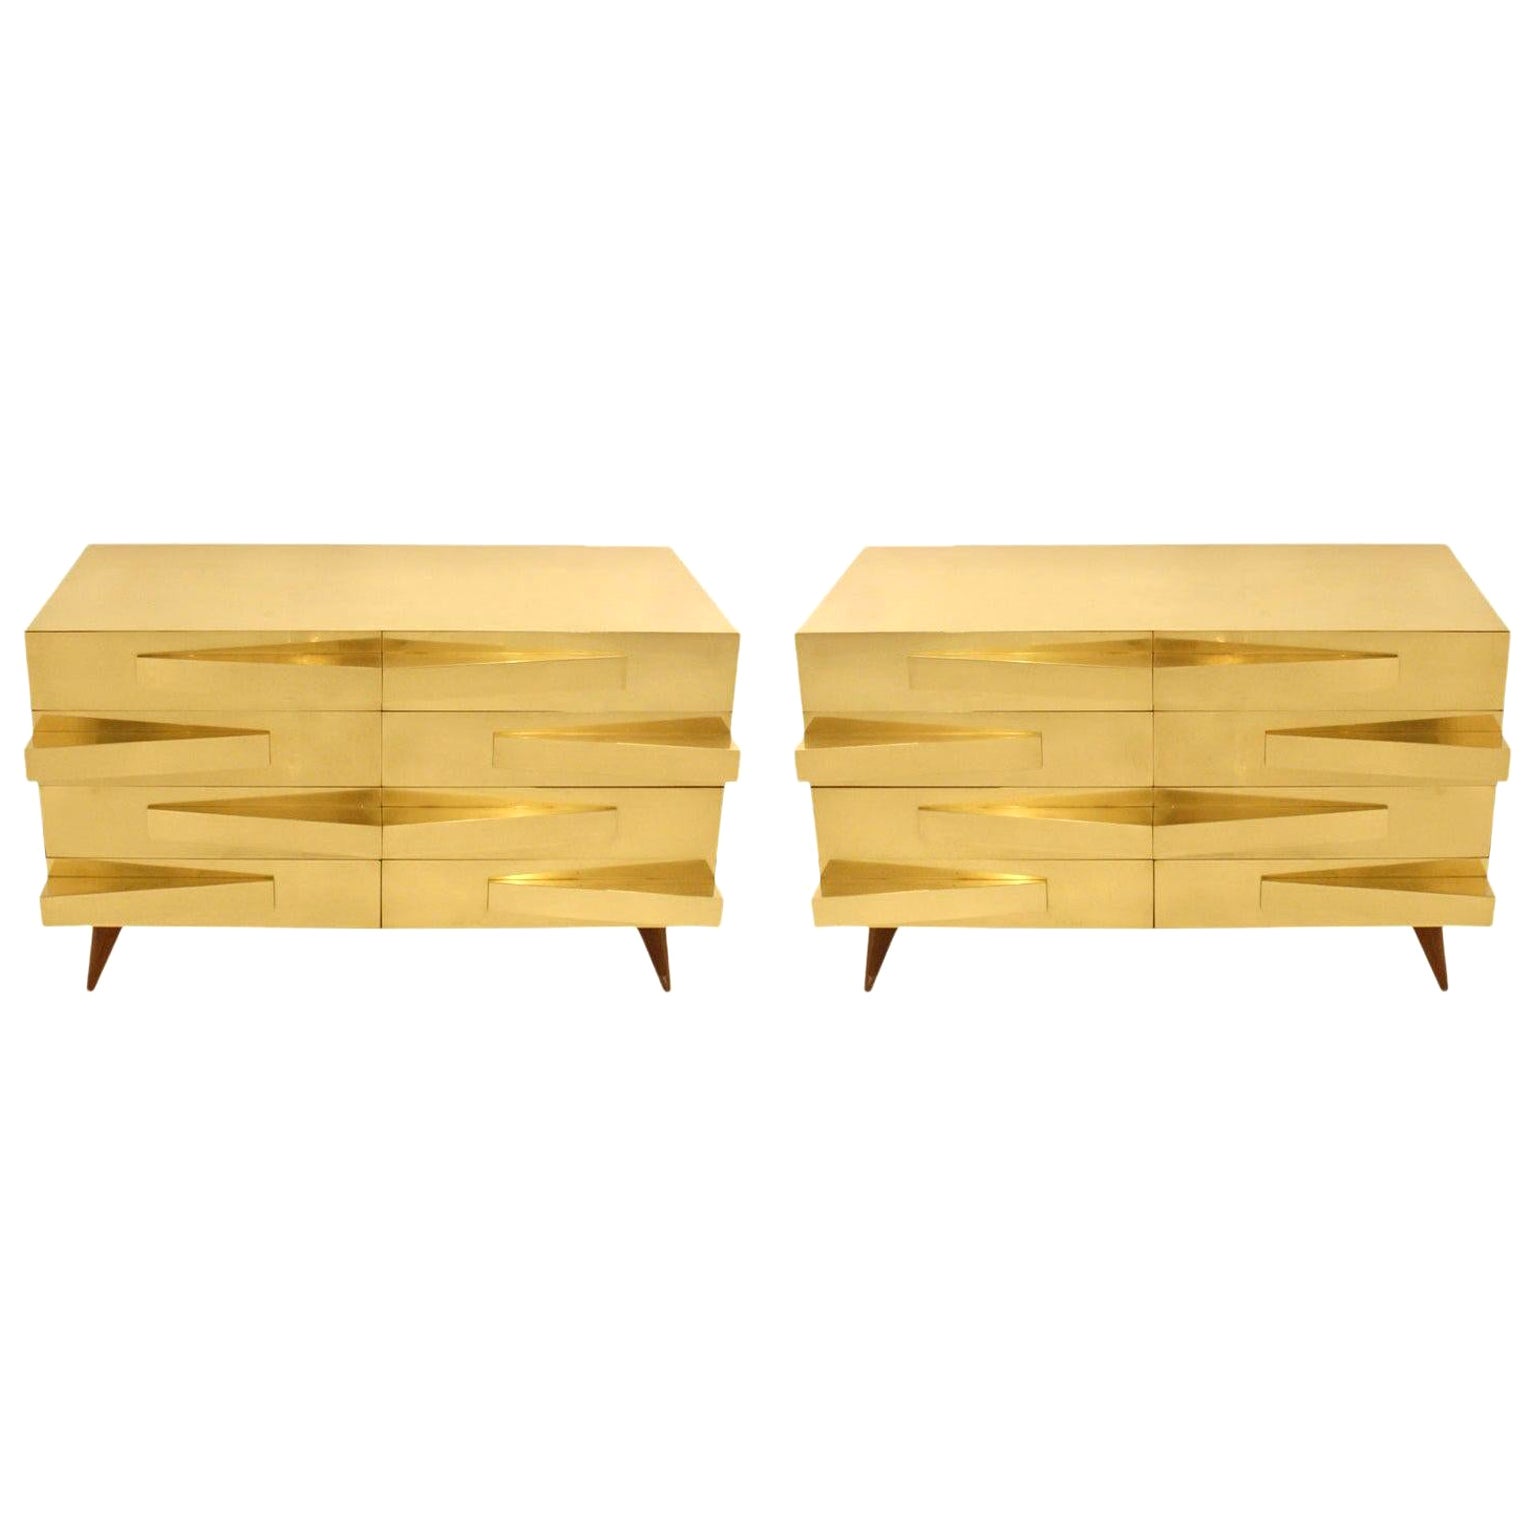 Mid-Century Modern Style Wood and Brass Italian Pair of Commodes For Sale